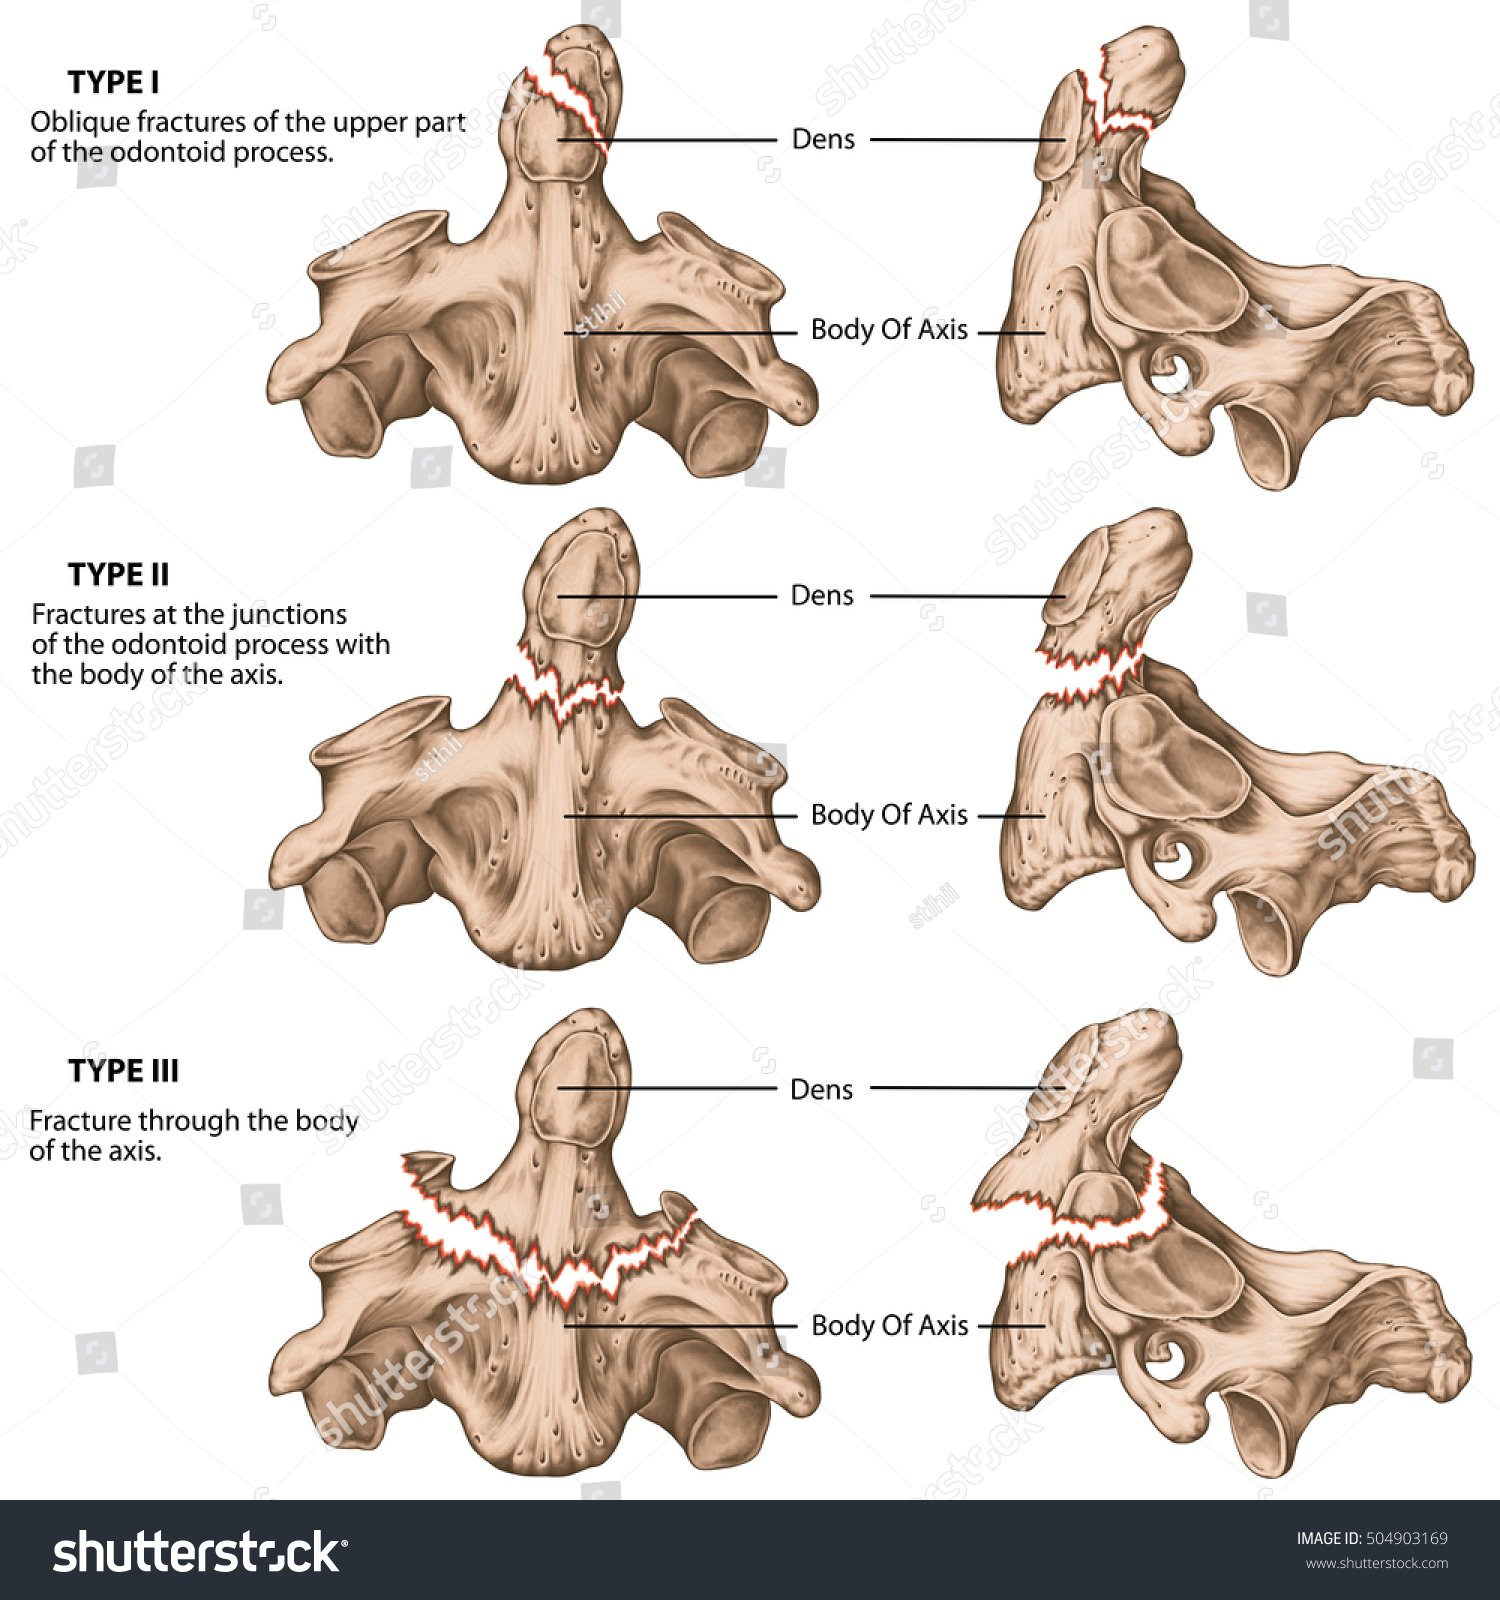 Test Diagnosis of Odontoid Fracture